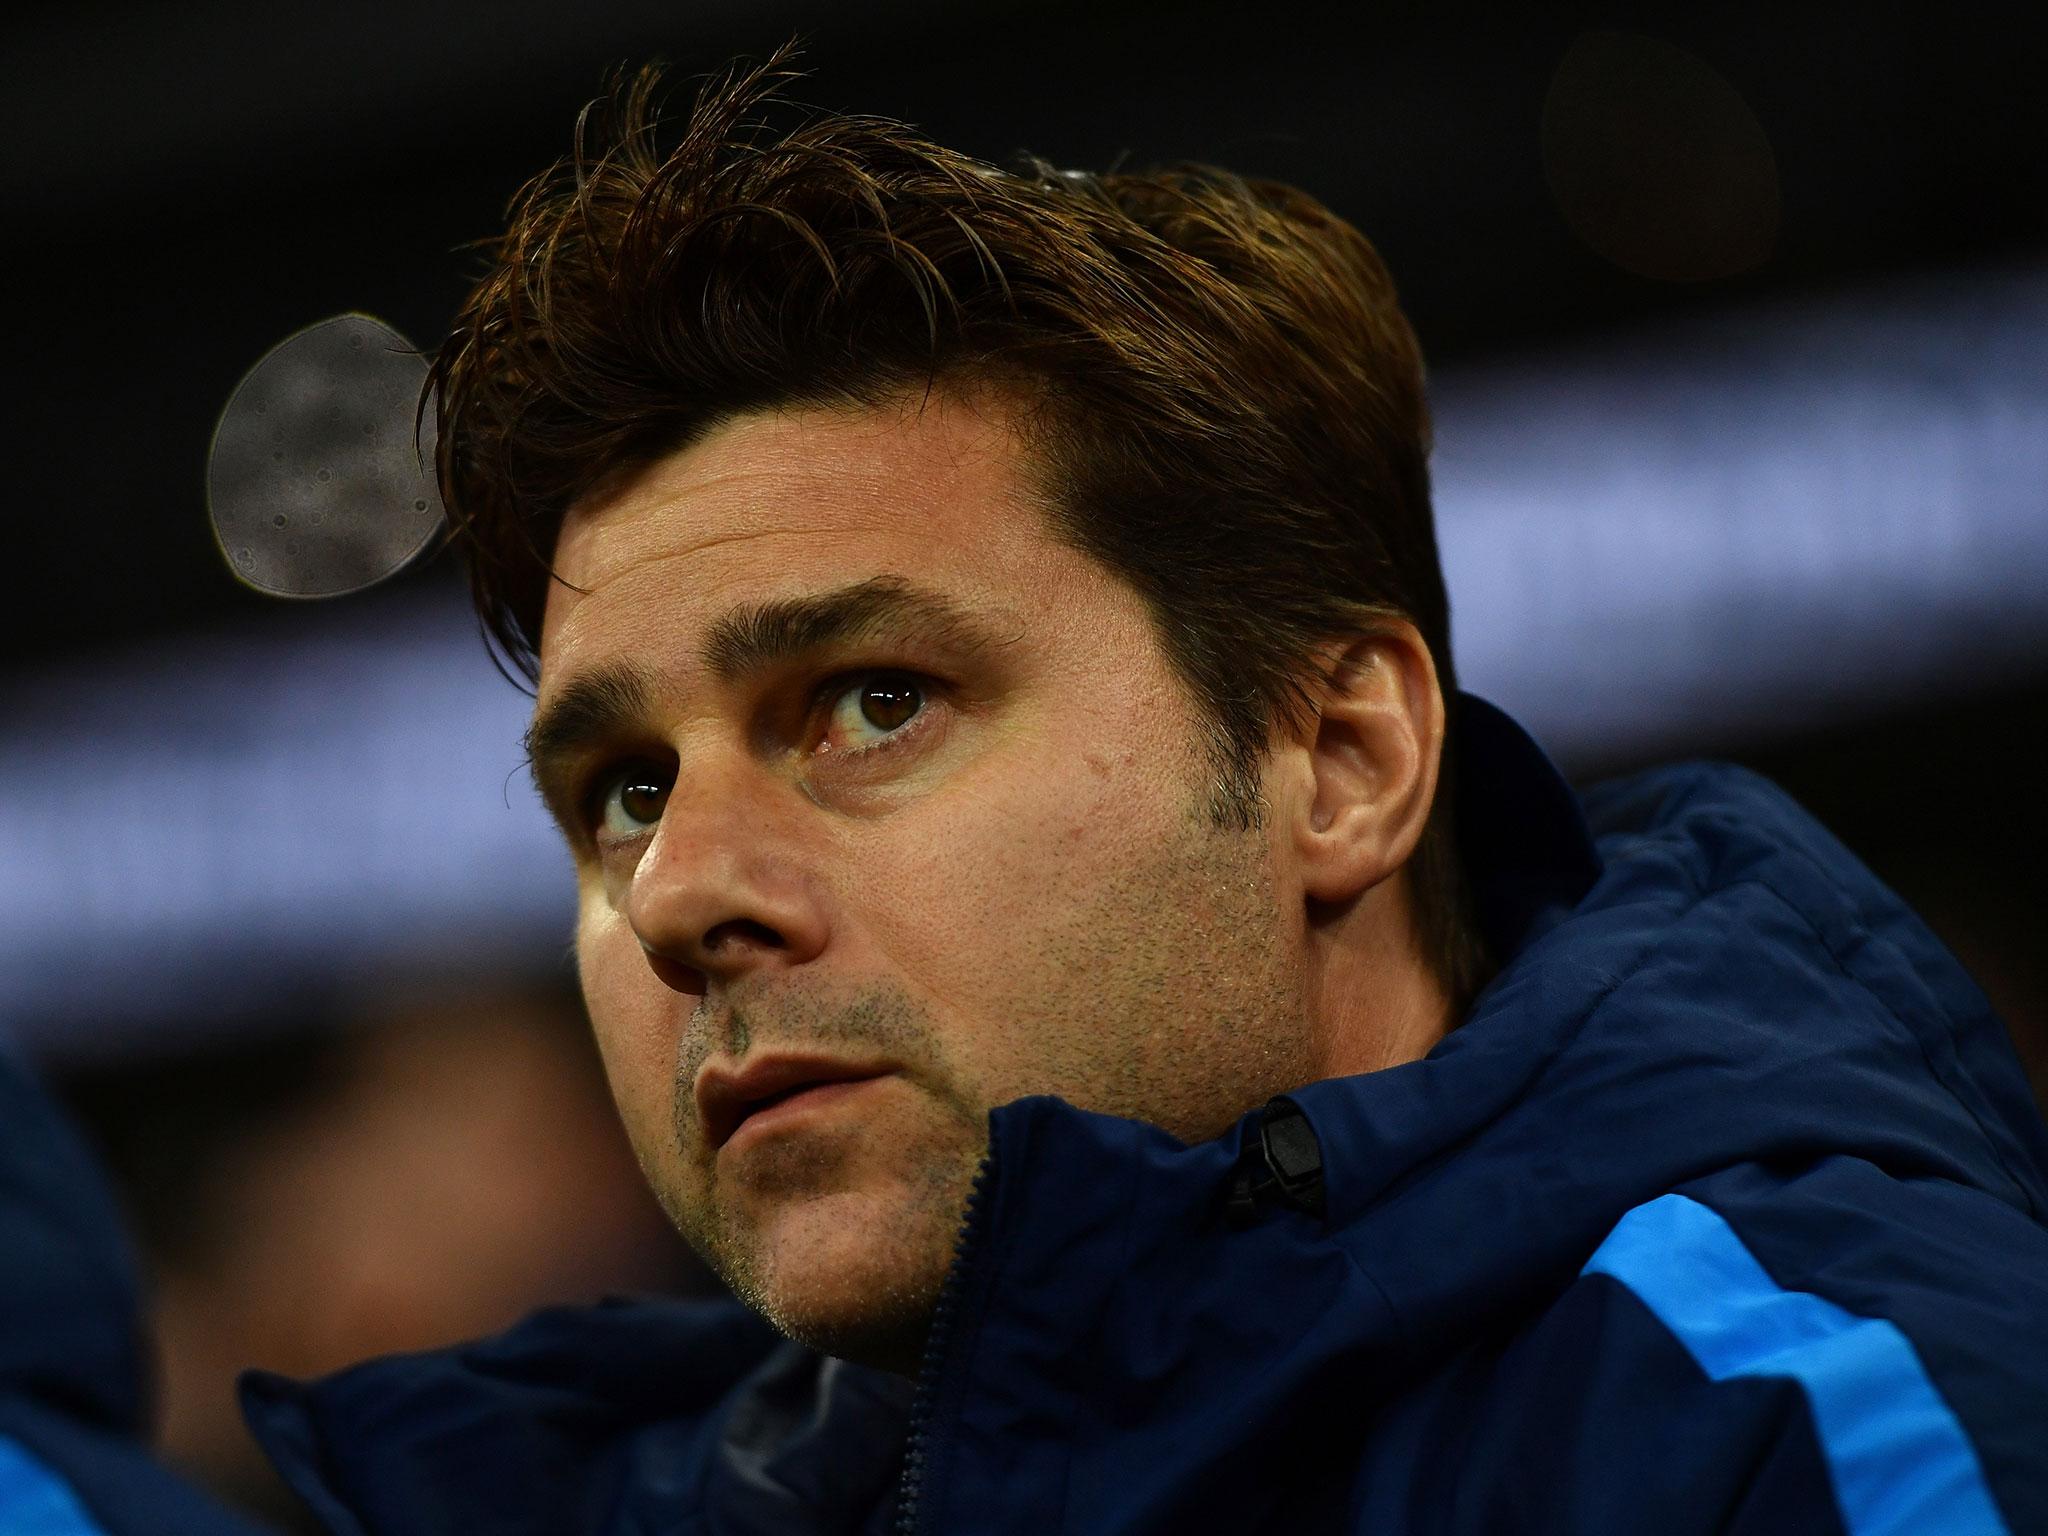 The Tottenham manager didn't seem too concerned by his side's exit though